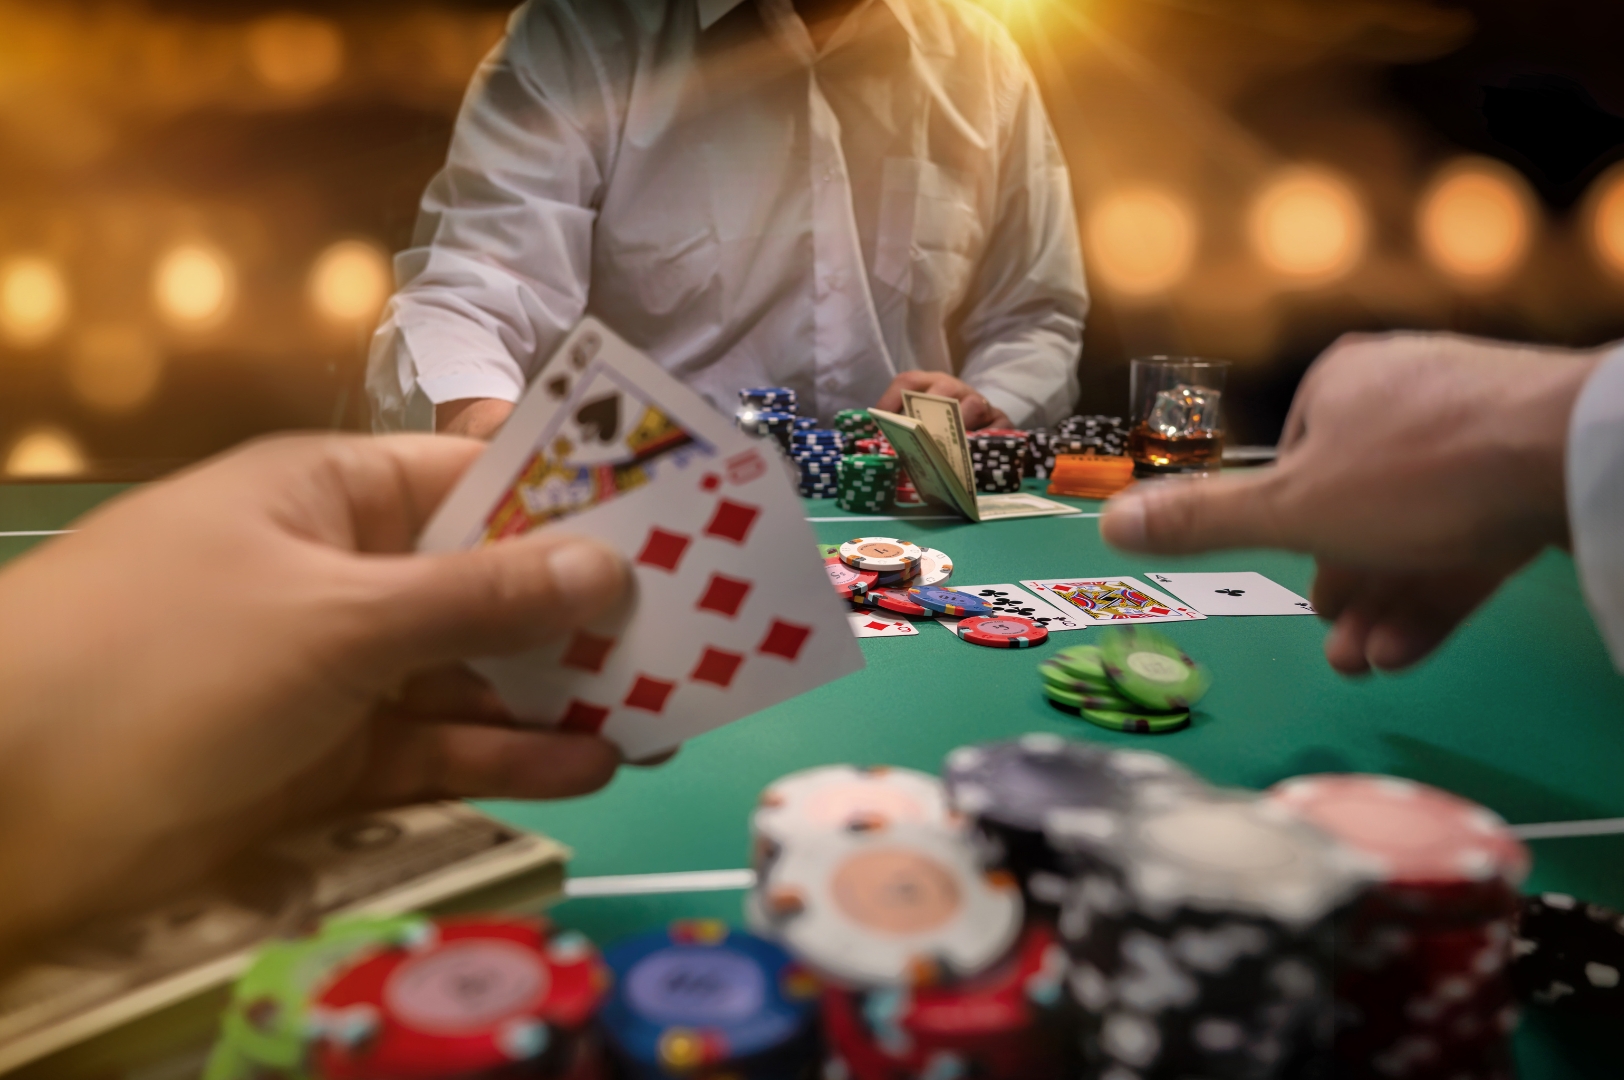 Different Kinds Of Poker Games Played Online